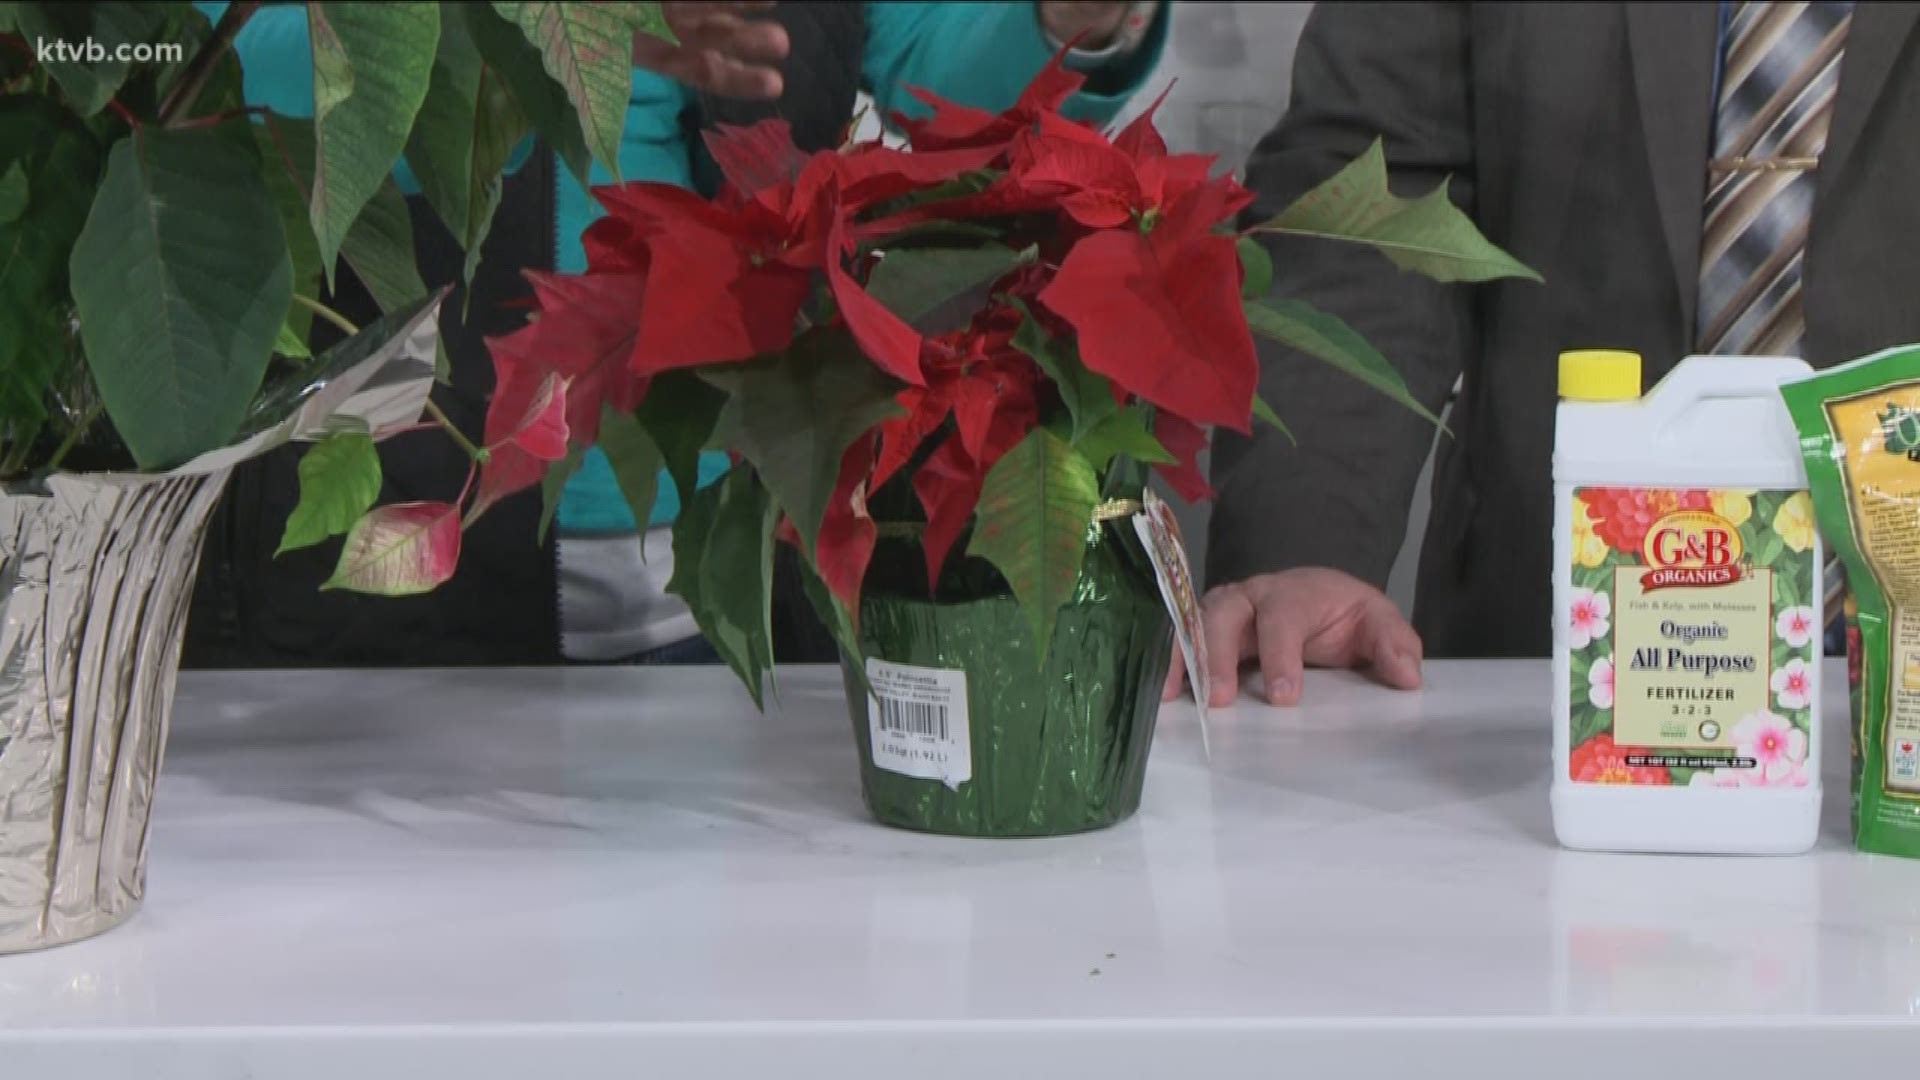 Jim and his guest show us a few tips to help your poinsettias last longer.